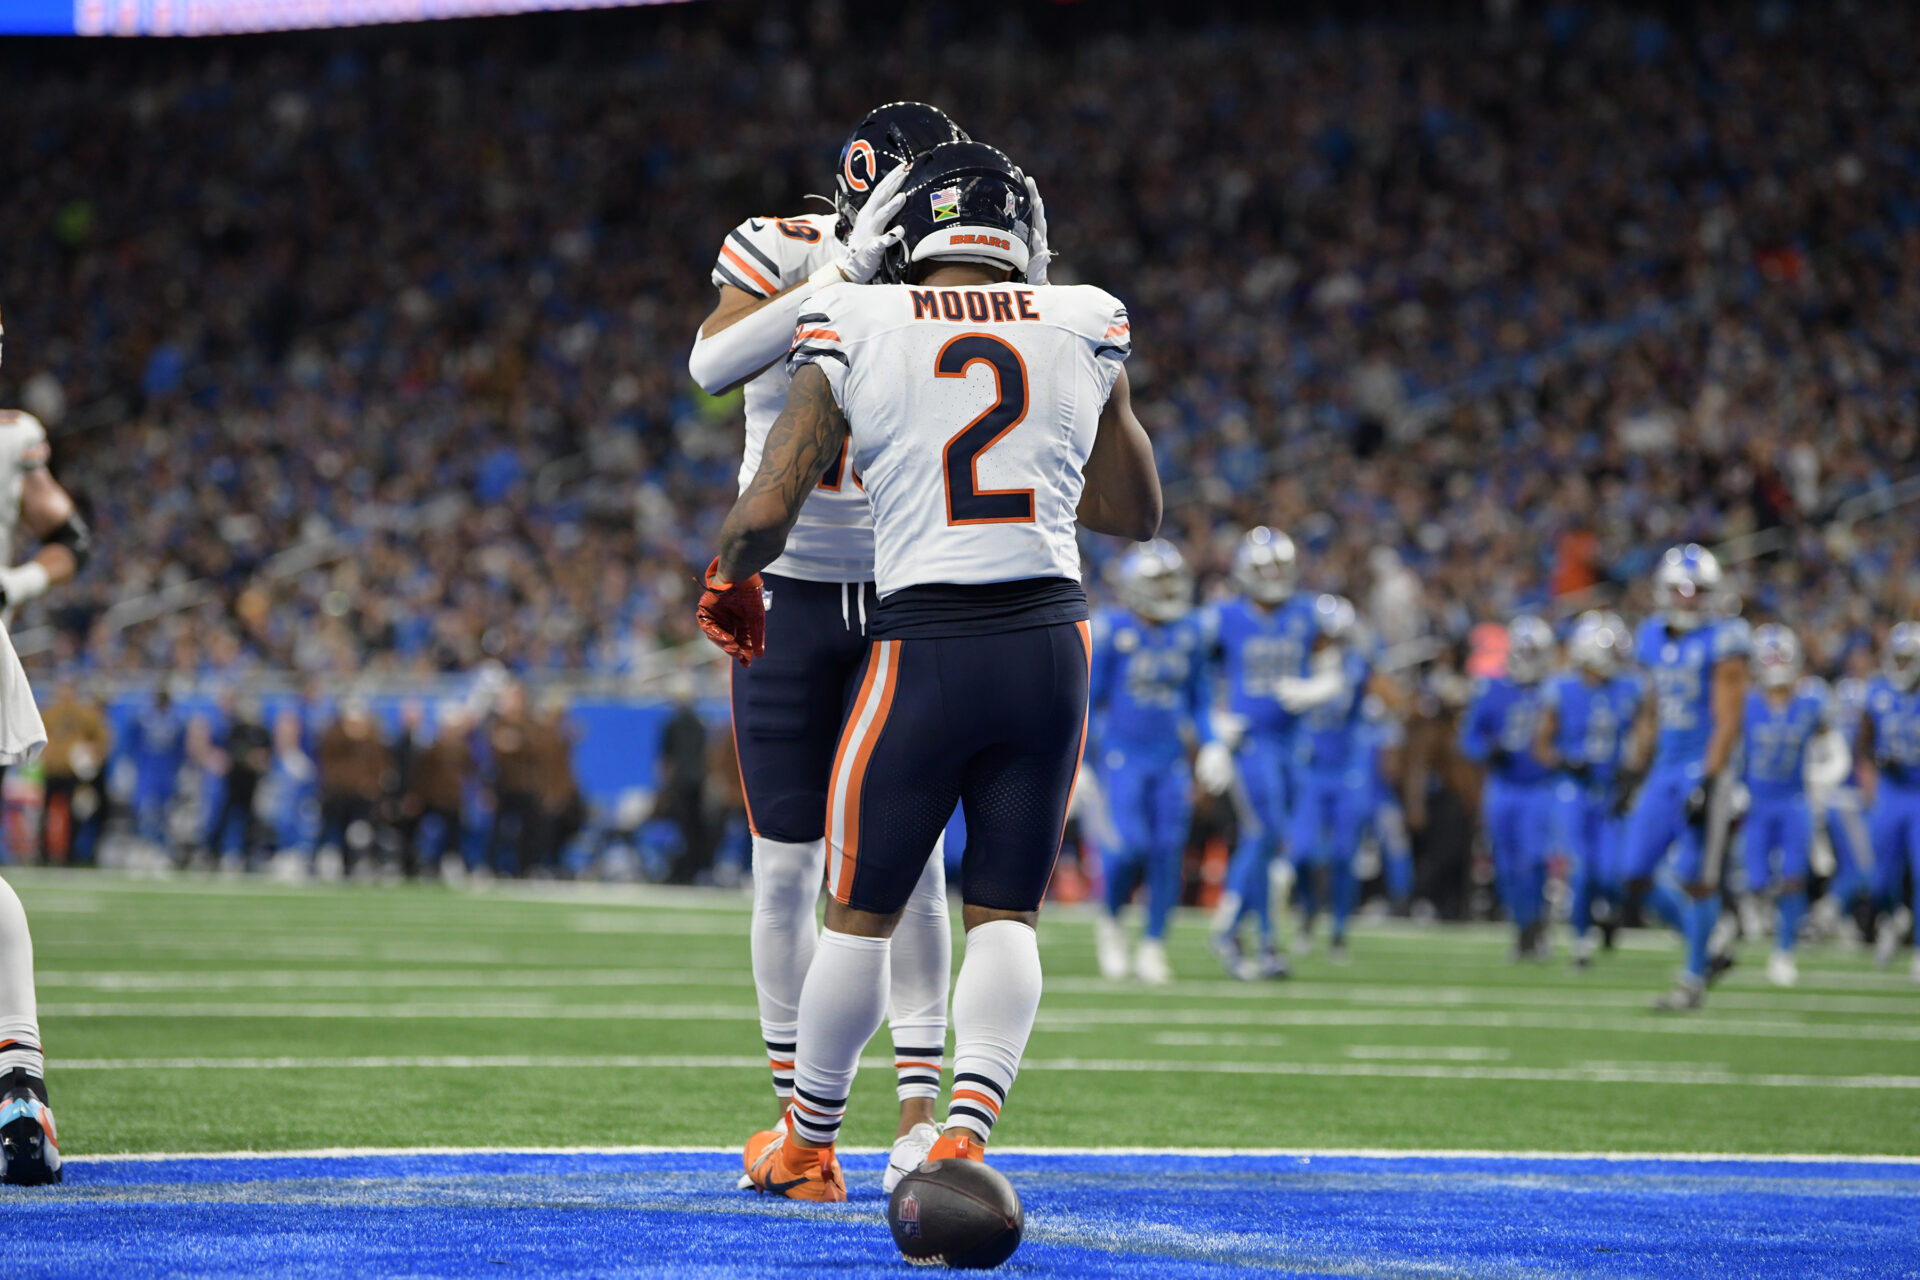 Chicago Bears wide receiver DJ Moore (2) celebrates with a teammate after catching a pass for a touchdown against the Detroit Lions in the third quarter at Ford Field.